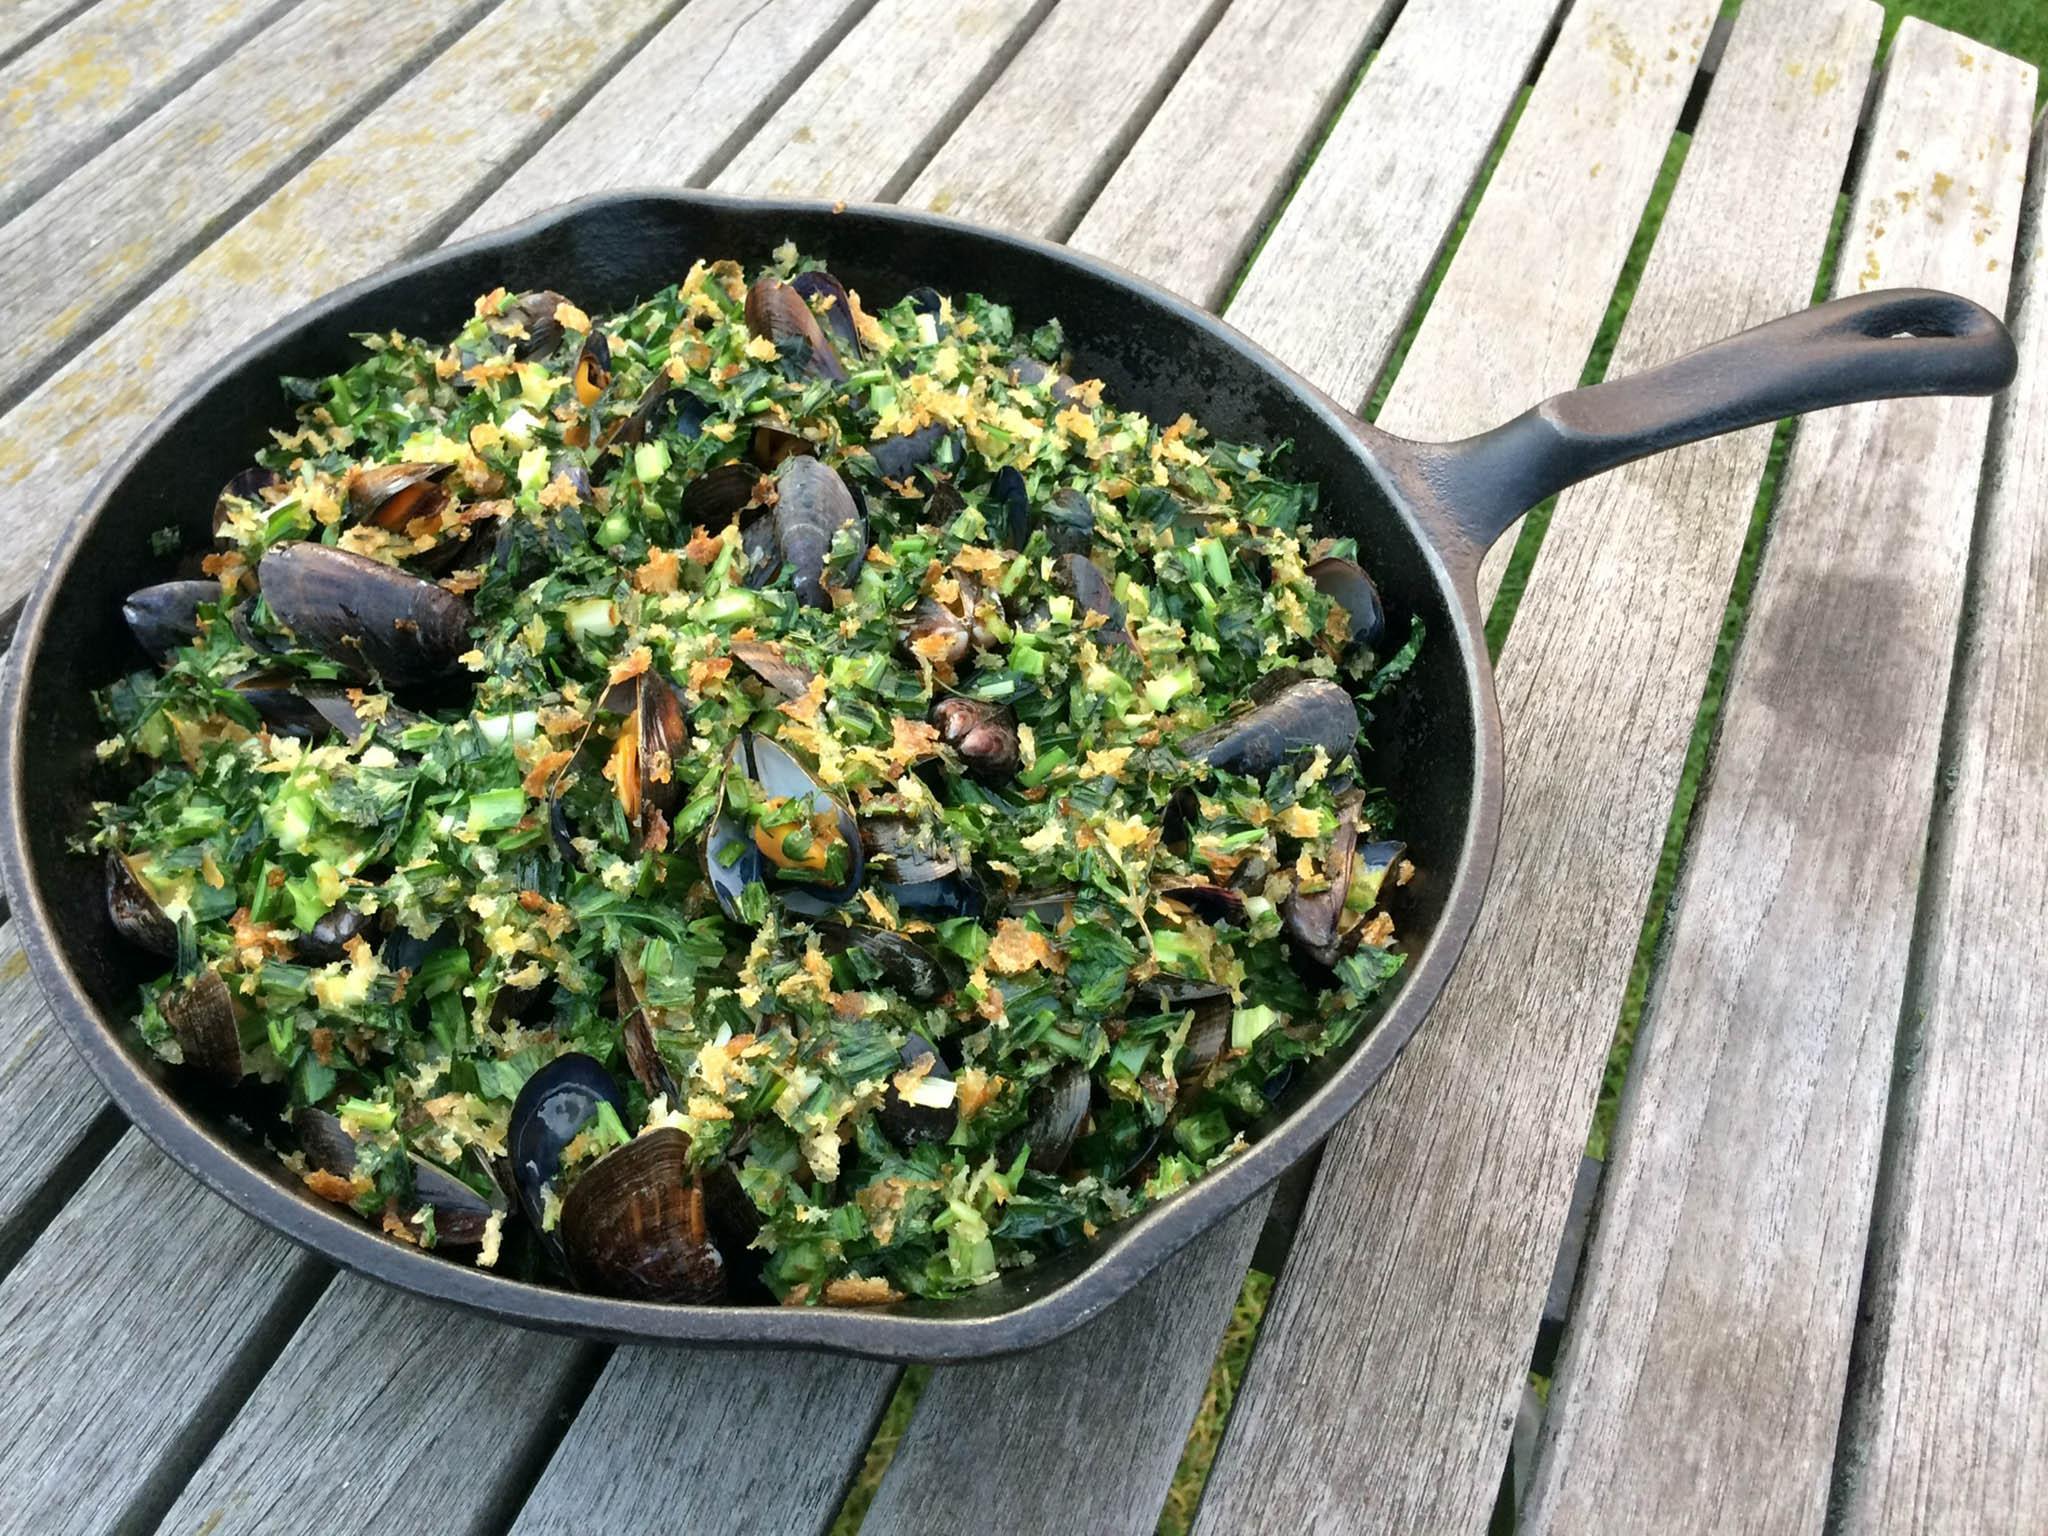 Mussels cooked in parsley crumb